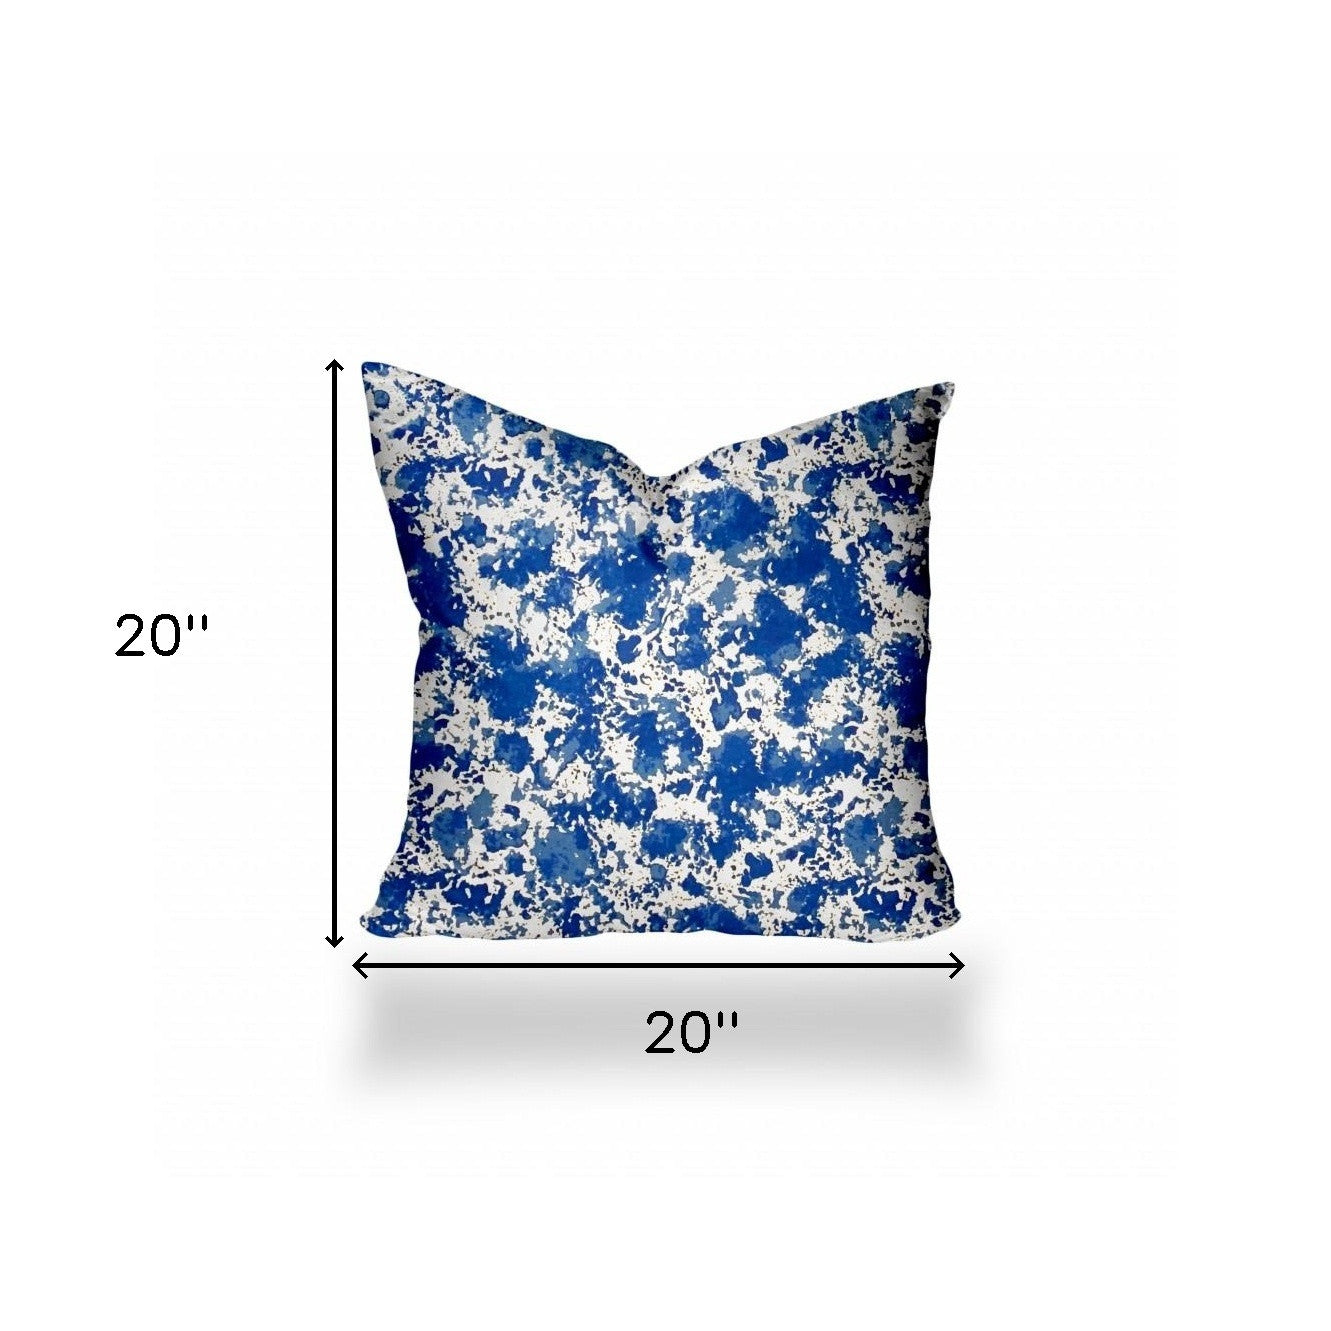 20" X 20" Blue And White Zippered Coastal Throw Indoor Outdoor Pillow